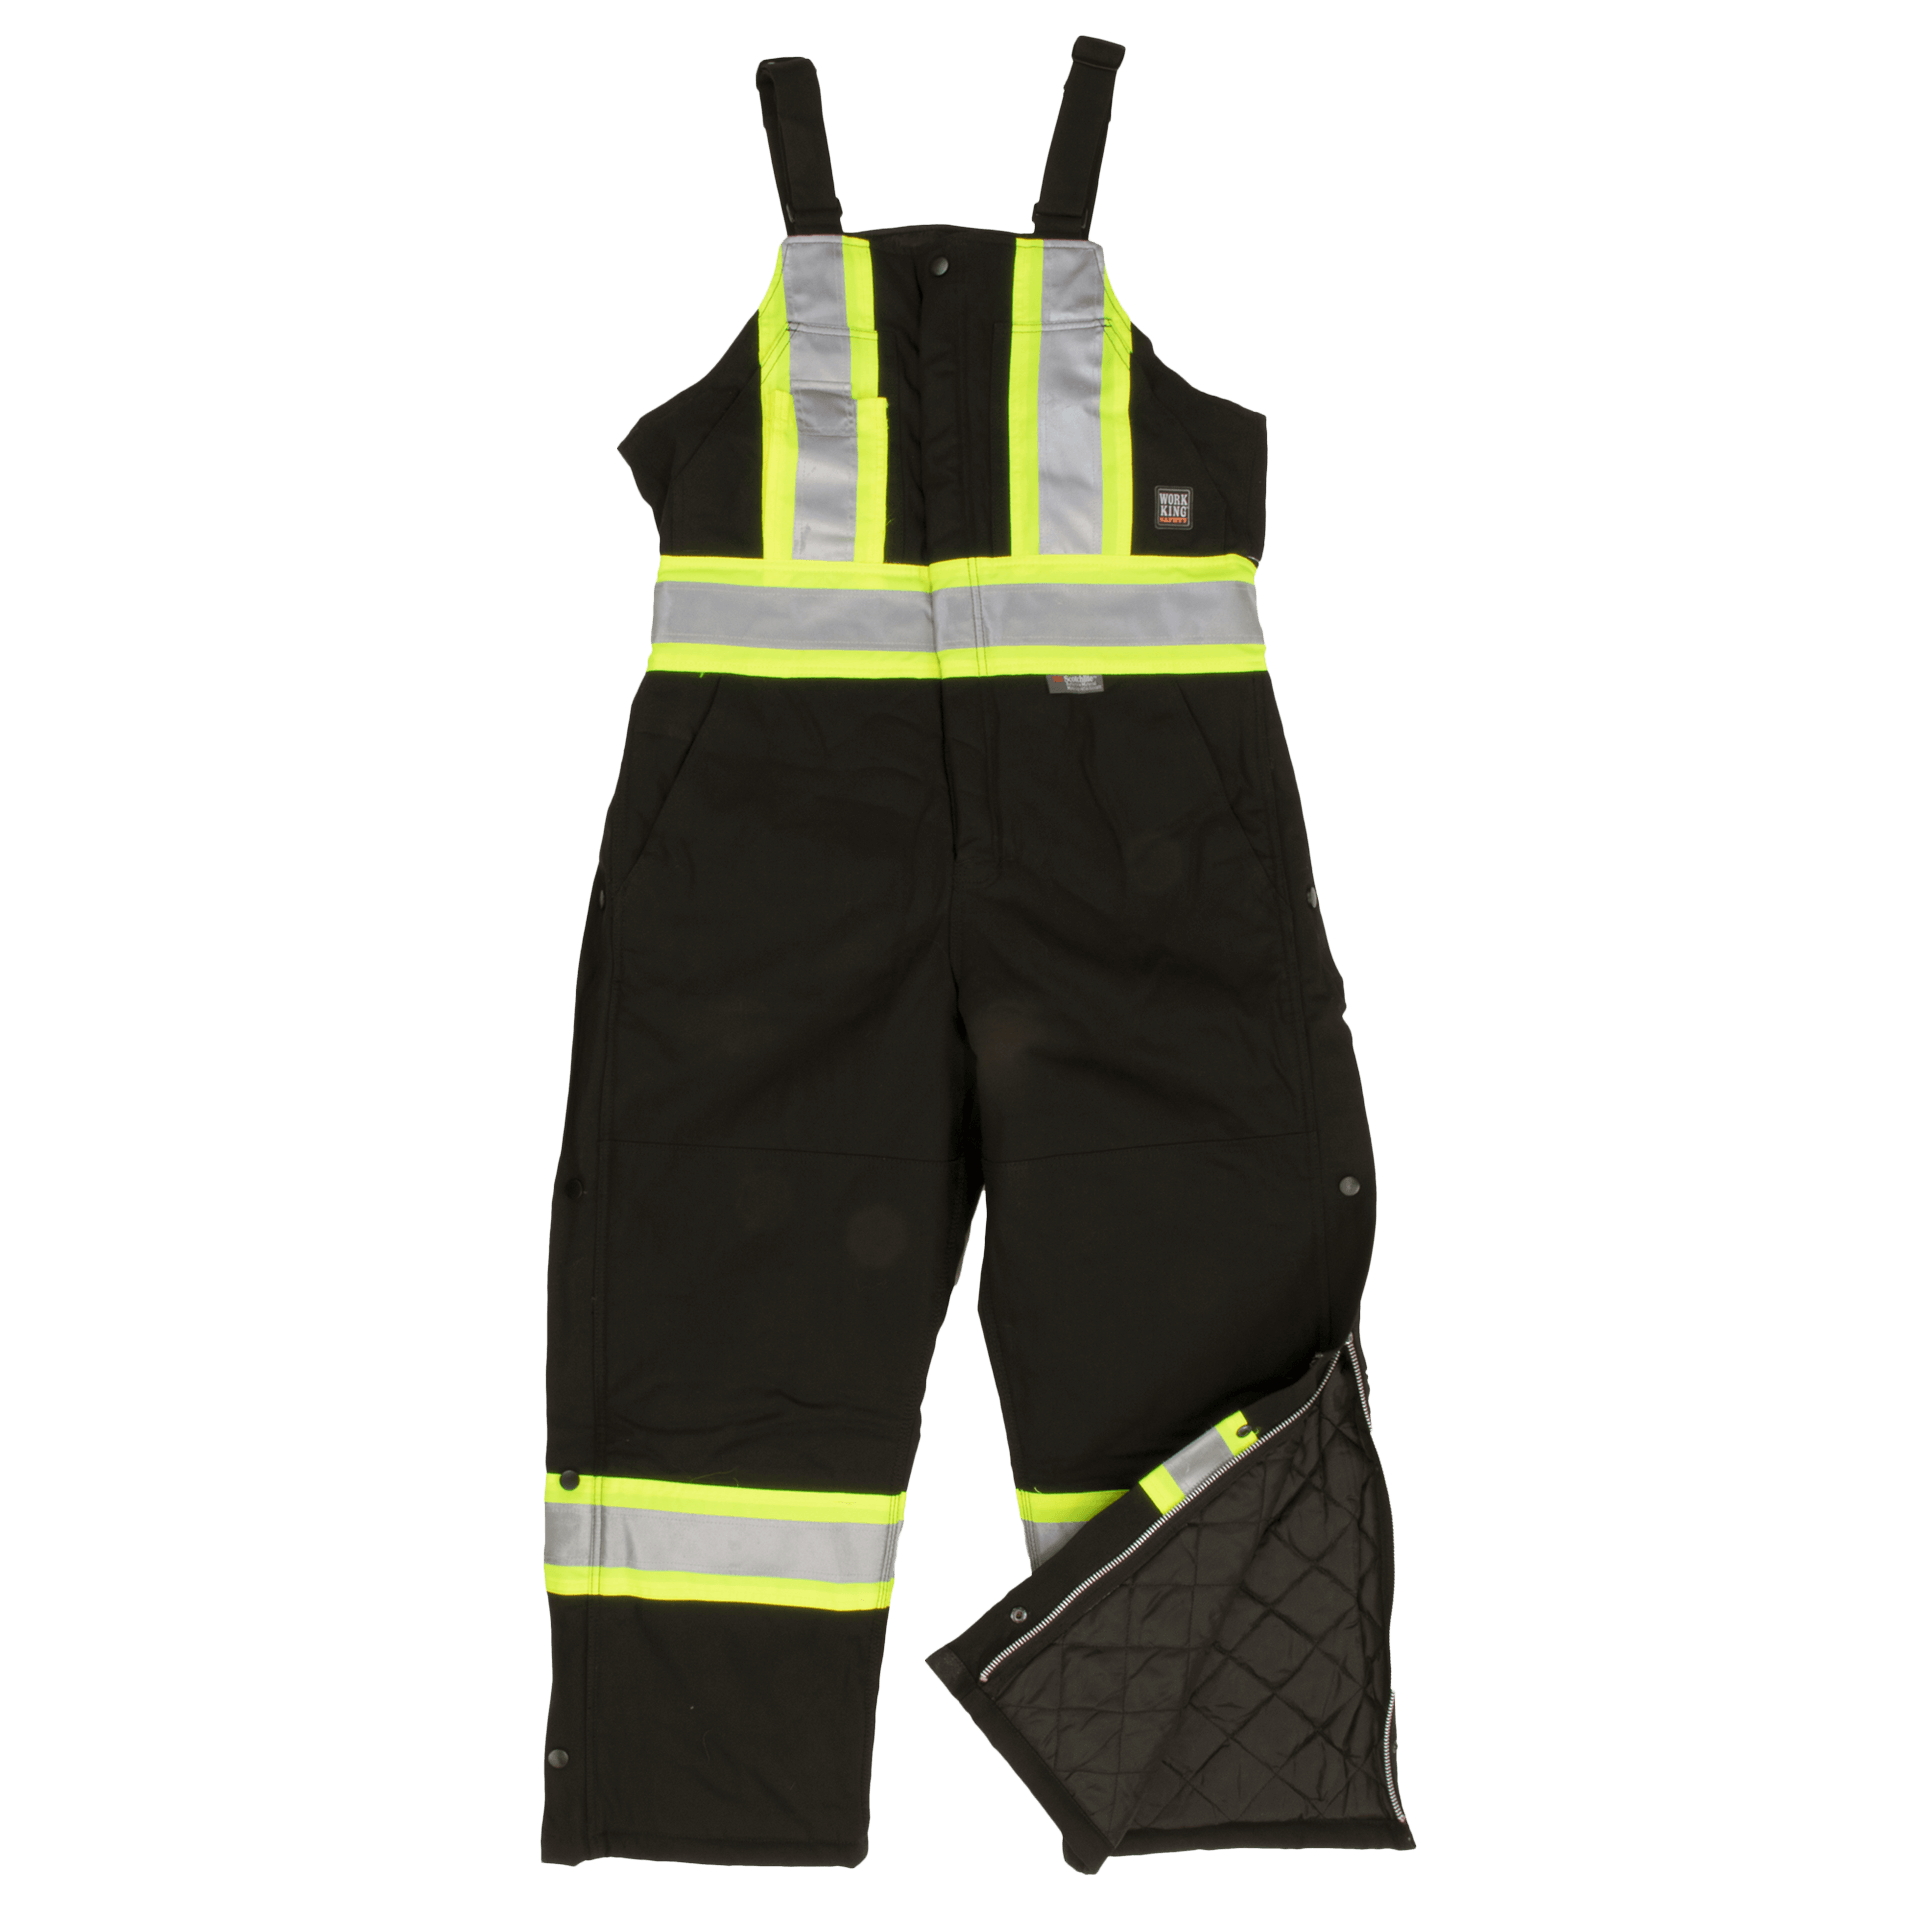 Tough Duck Insulated Safety Overall (Cotton Duck) - S757 - Black